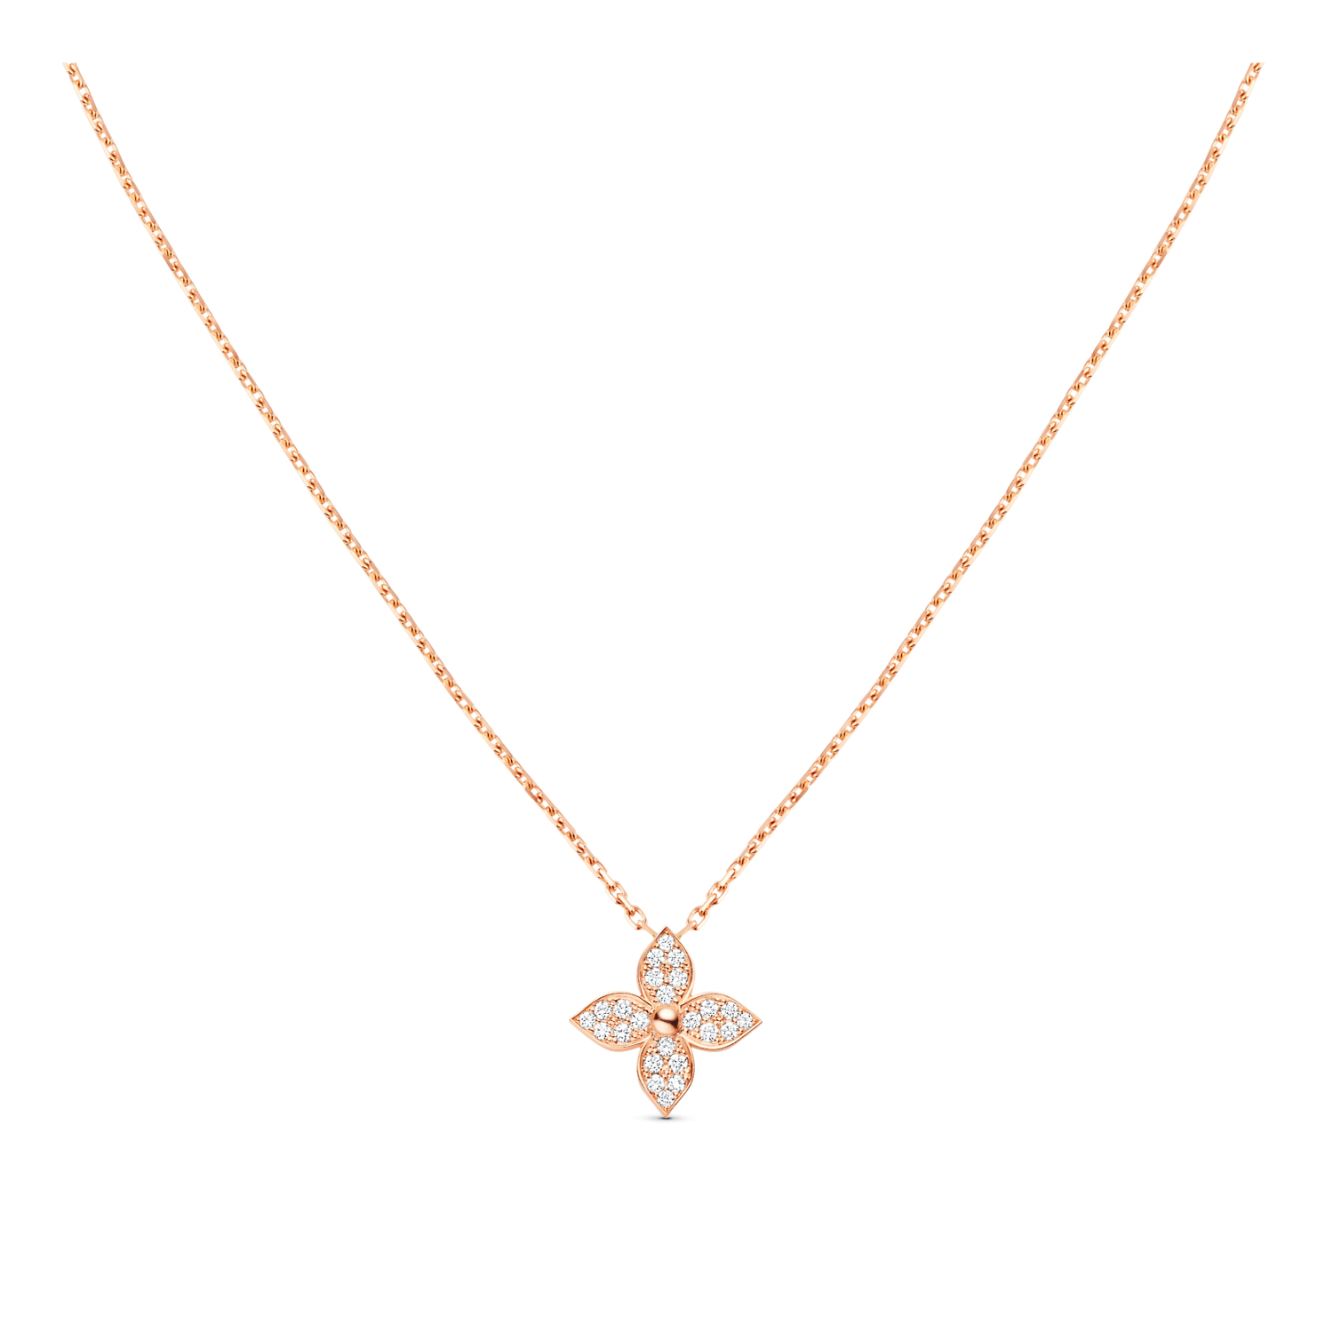 Louis Vuitton pre-owned 18kt Rose Gold Star Blossom Diamond